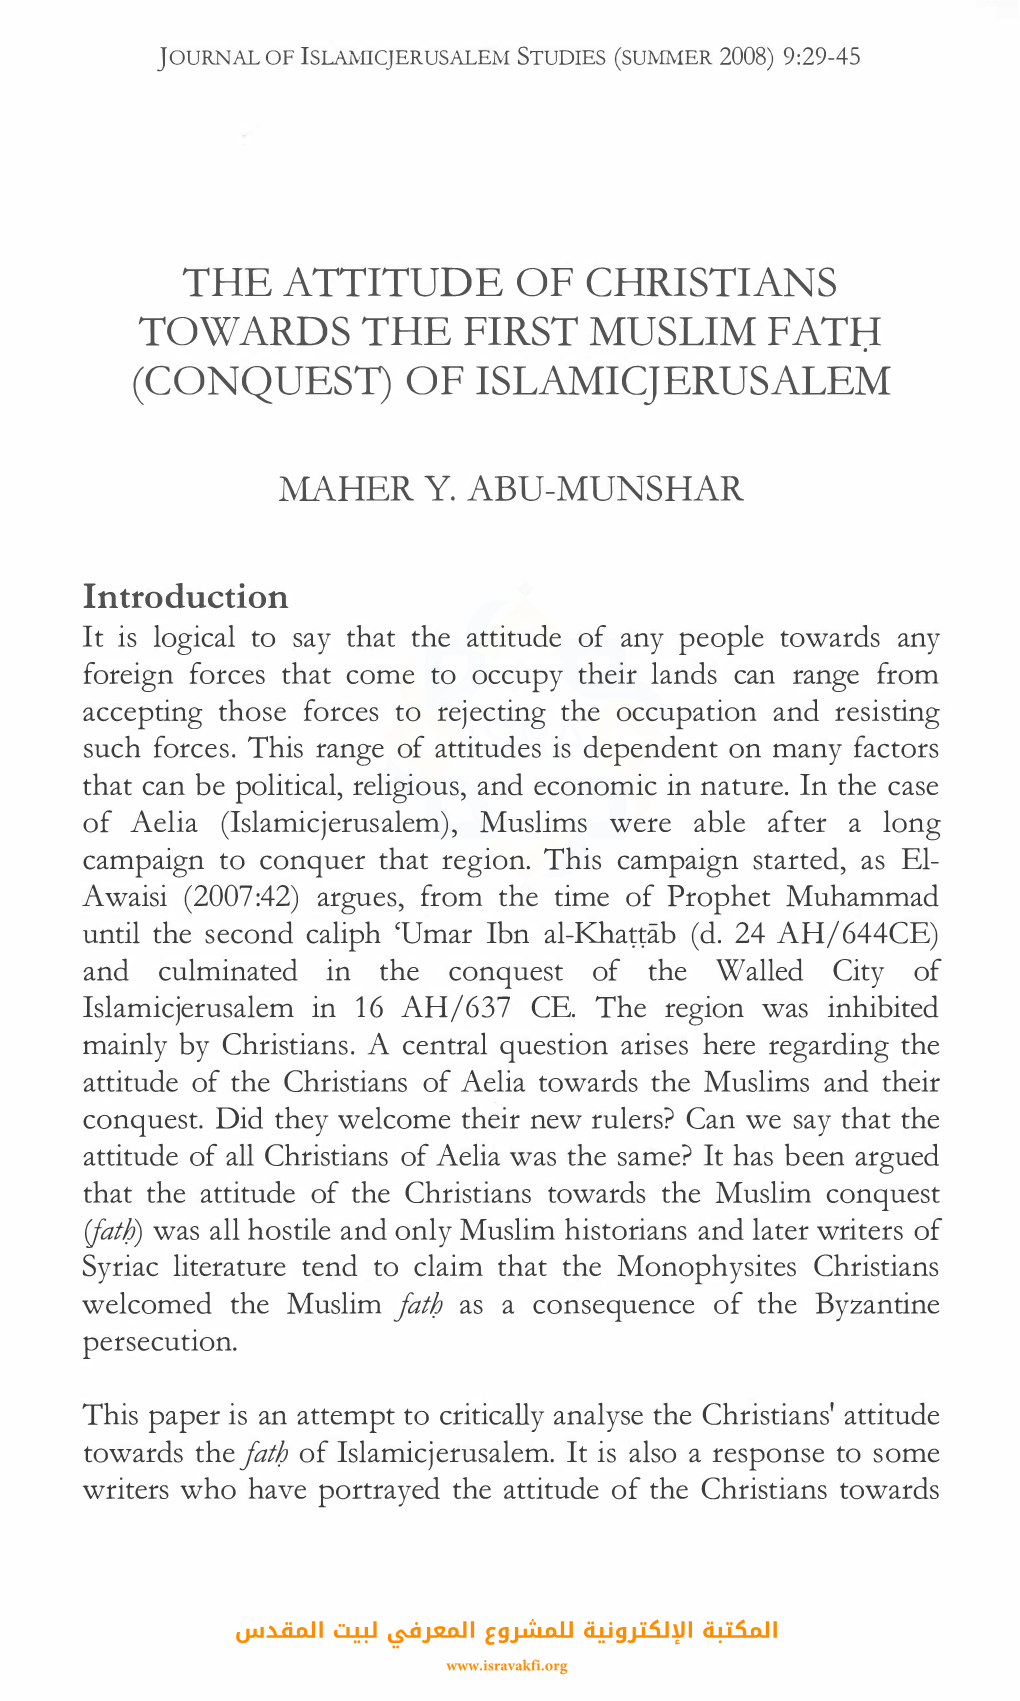 The Attitude of Christians Towards the First Muslim Fatb (Conquest) of Islamicjerusalem